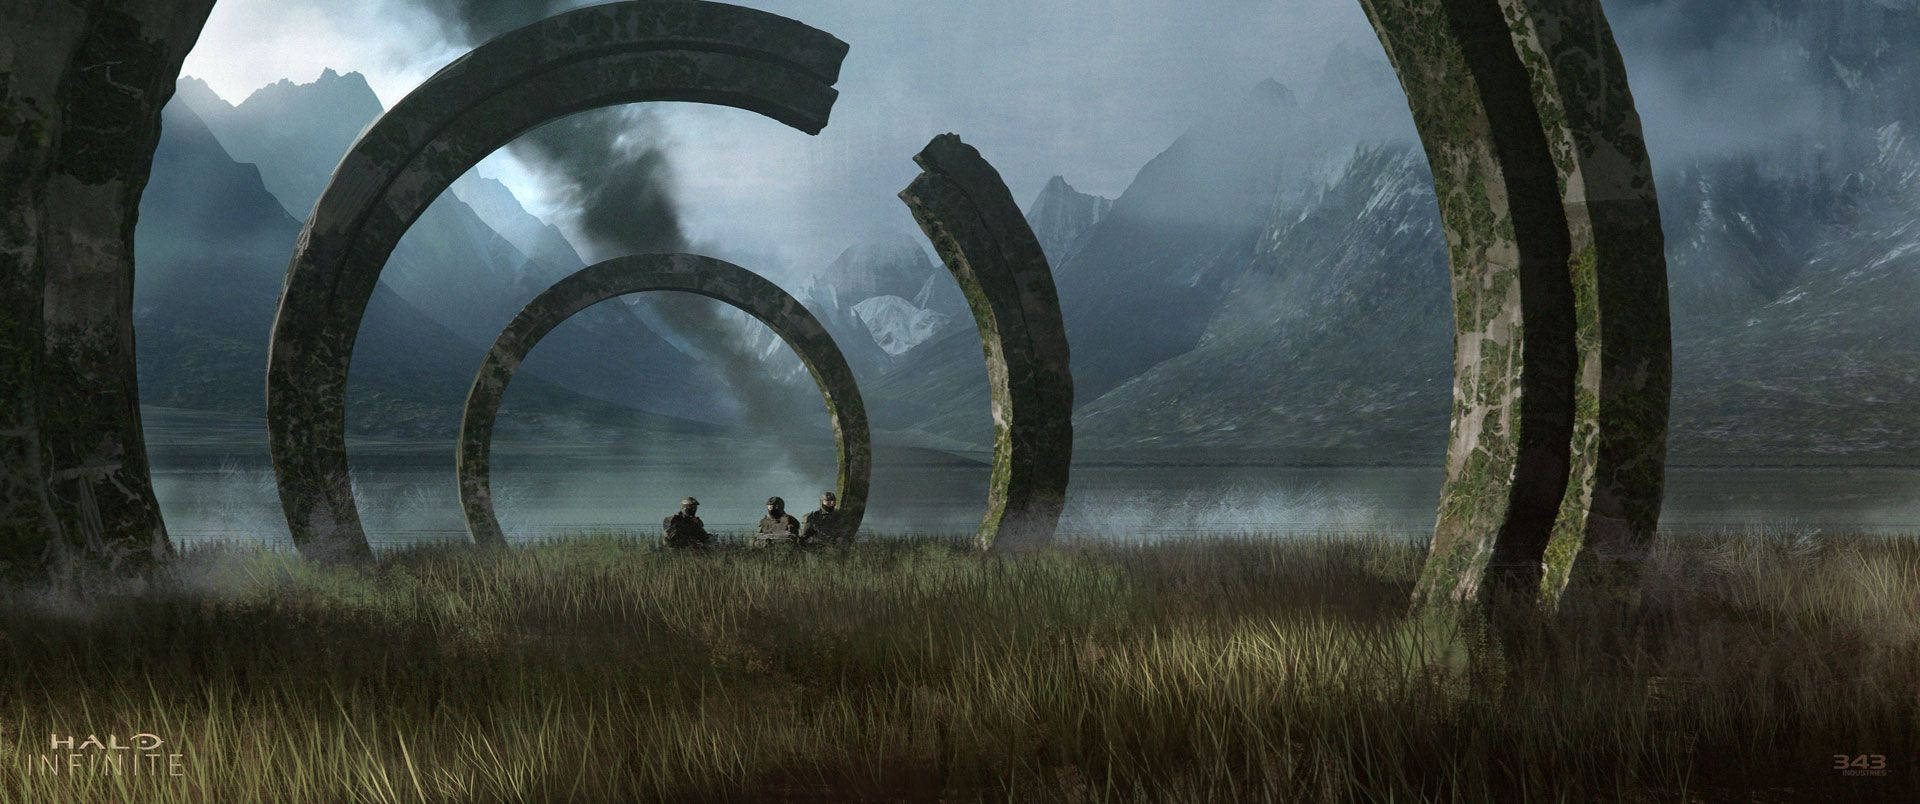 Halo Infinite Destroyed Rings Background